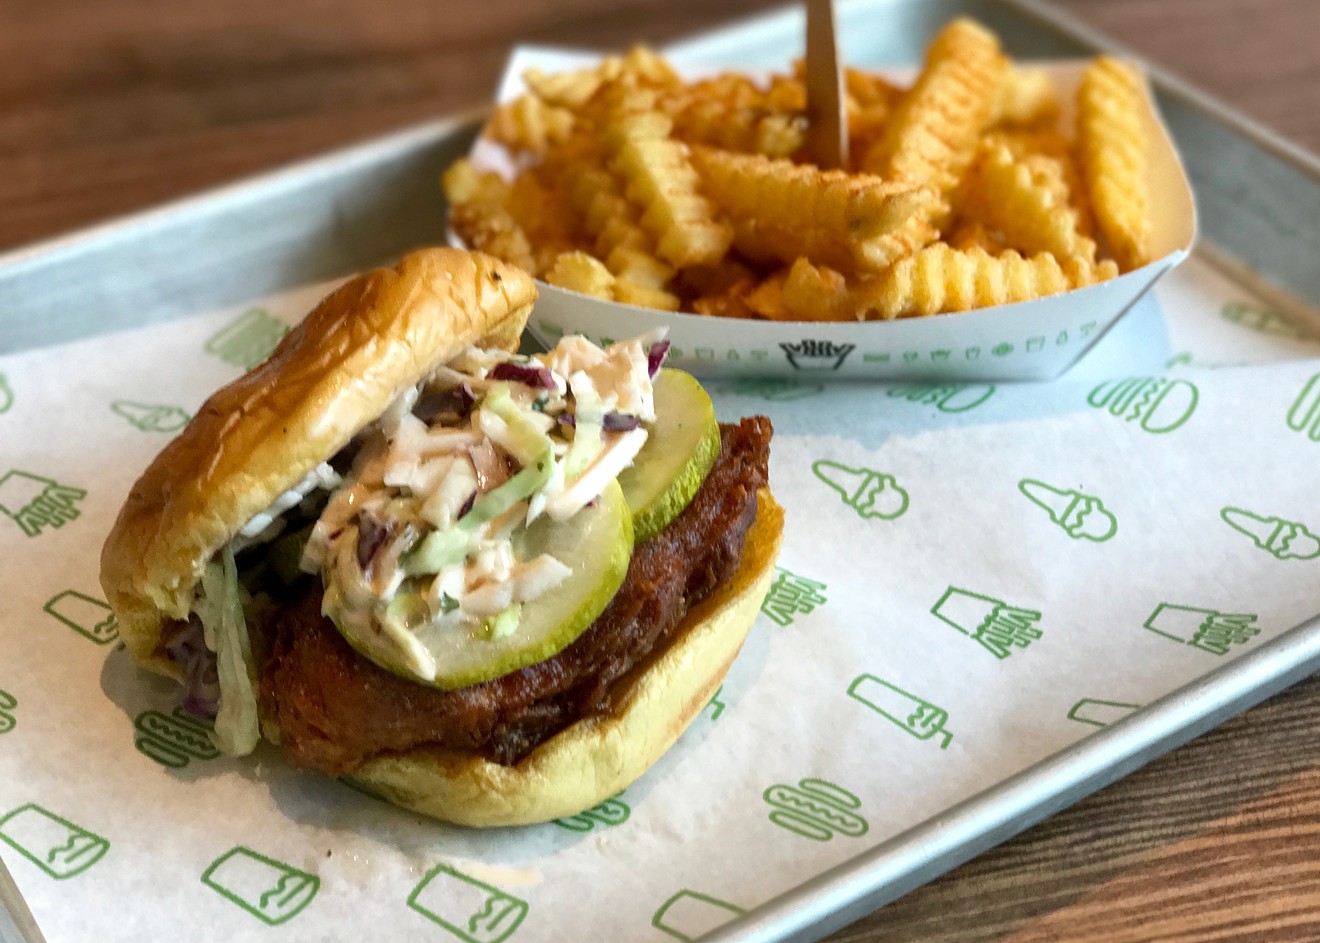 Shake Shack's Hot Chick'n and so-called spicy fries look the part. But looks aren't everything.